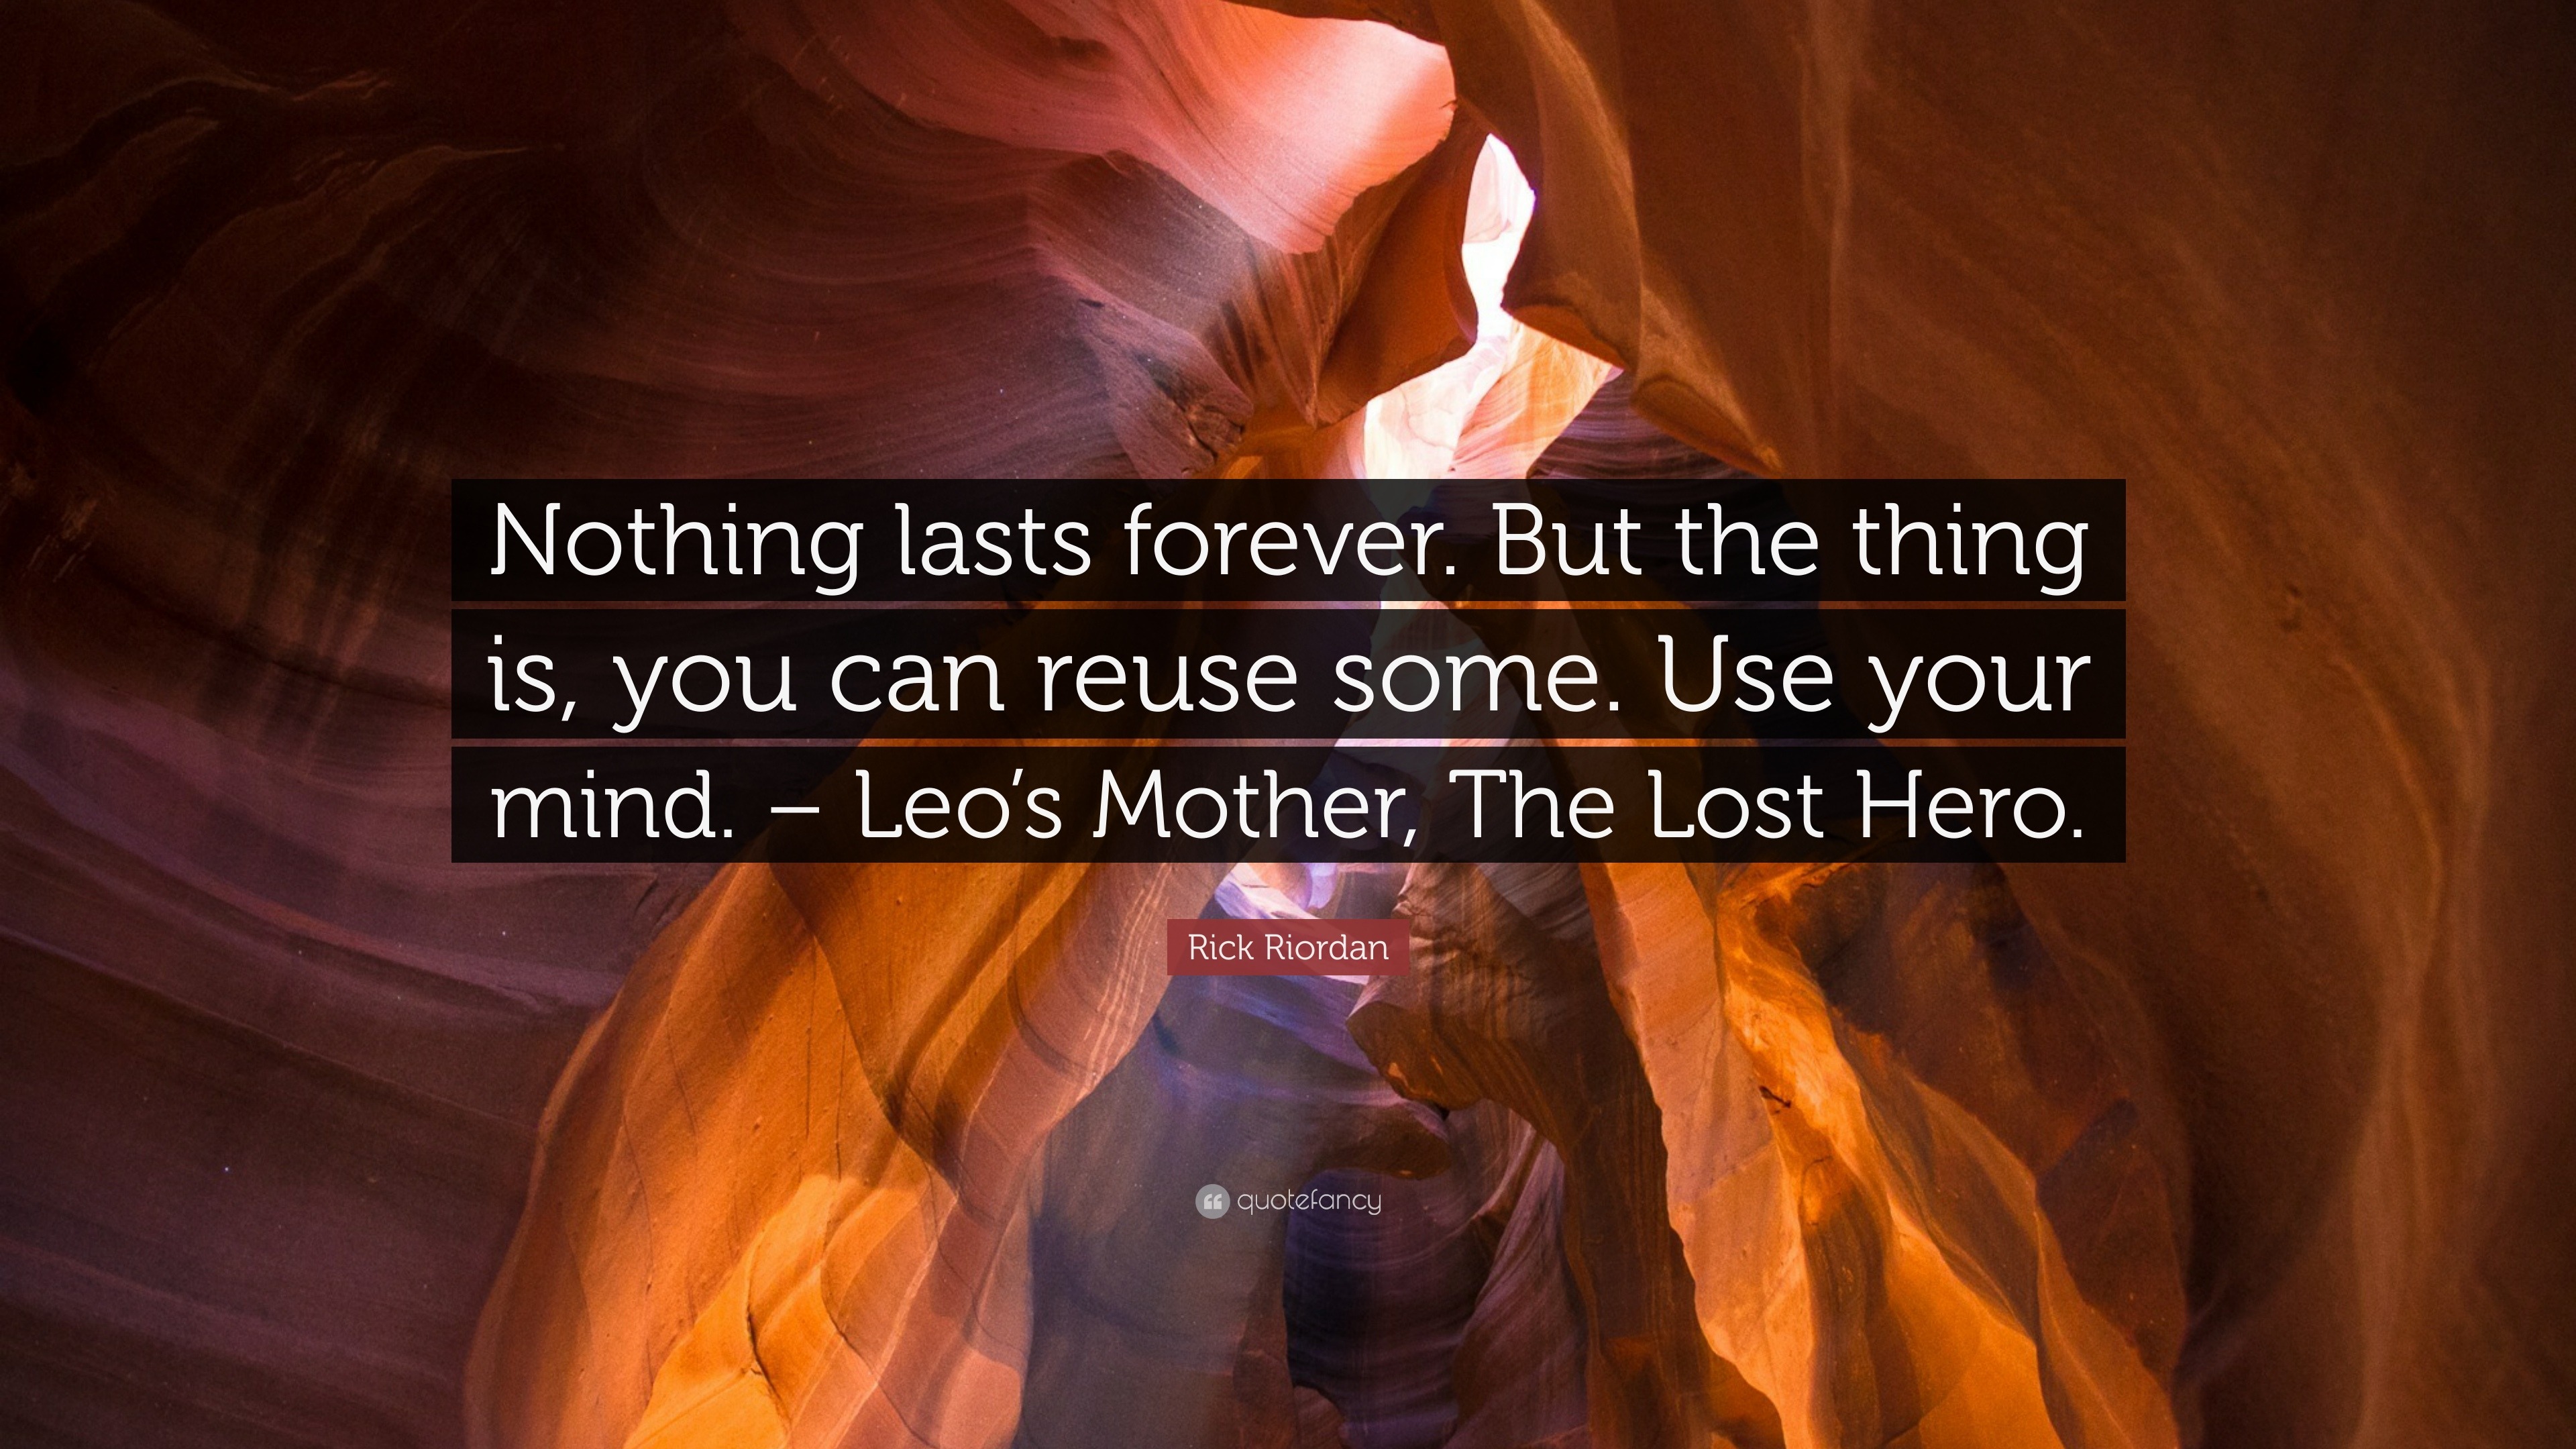 Rick Riordan Quote Nothing Lasts Forever But The Thing Is You Can Reuse Some Use Your